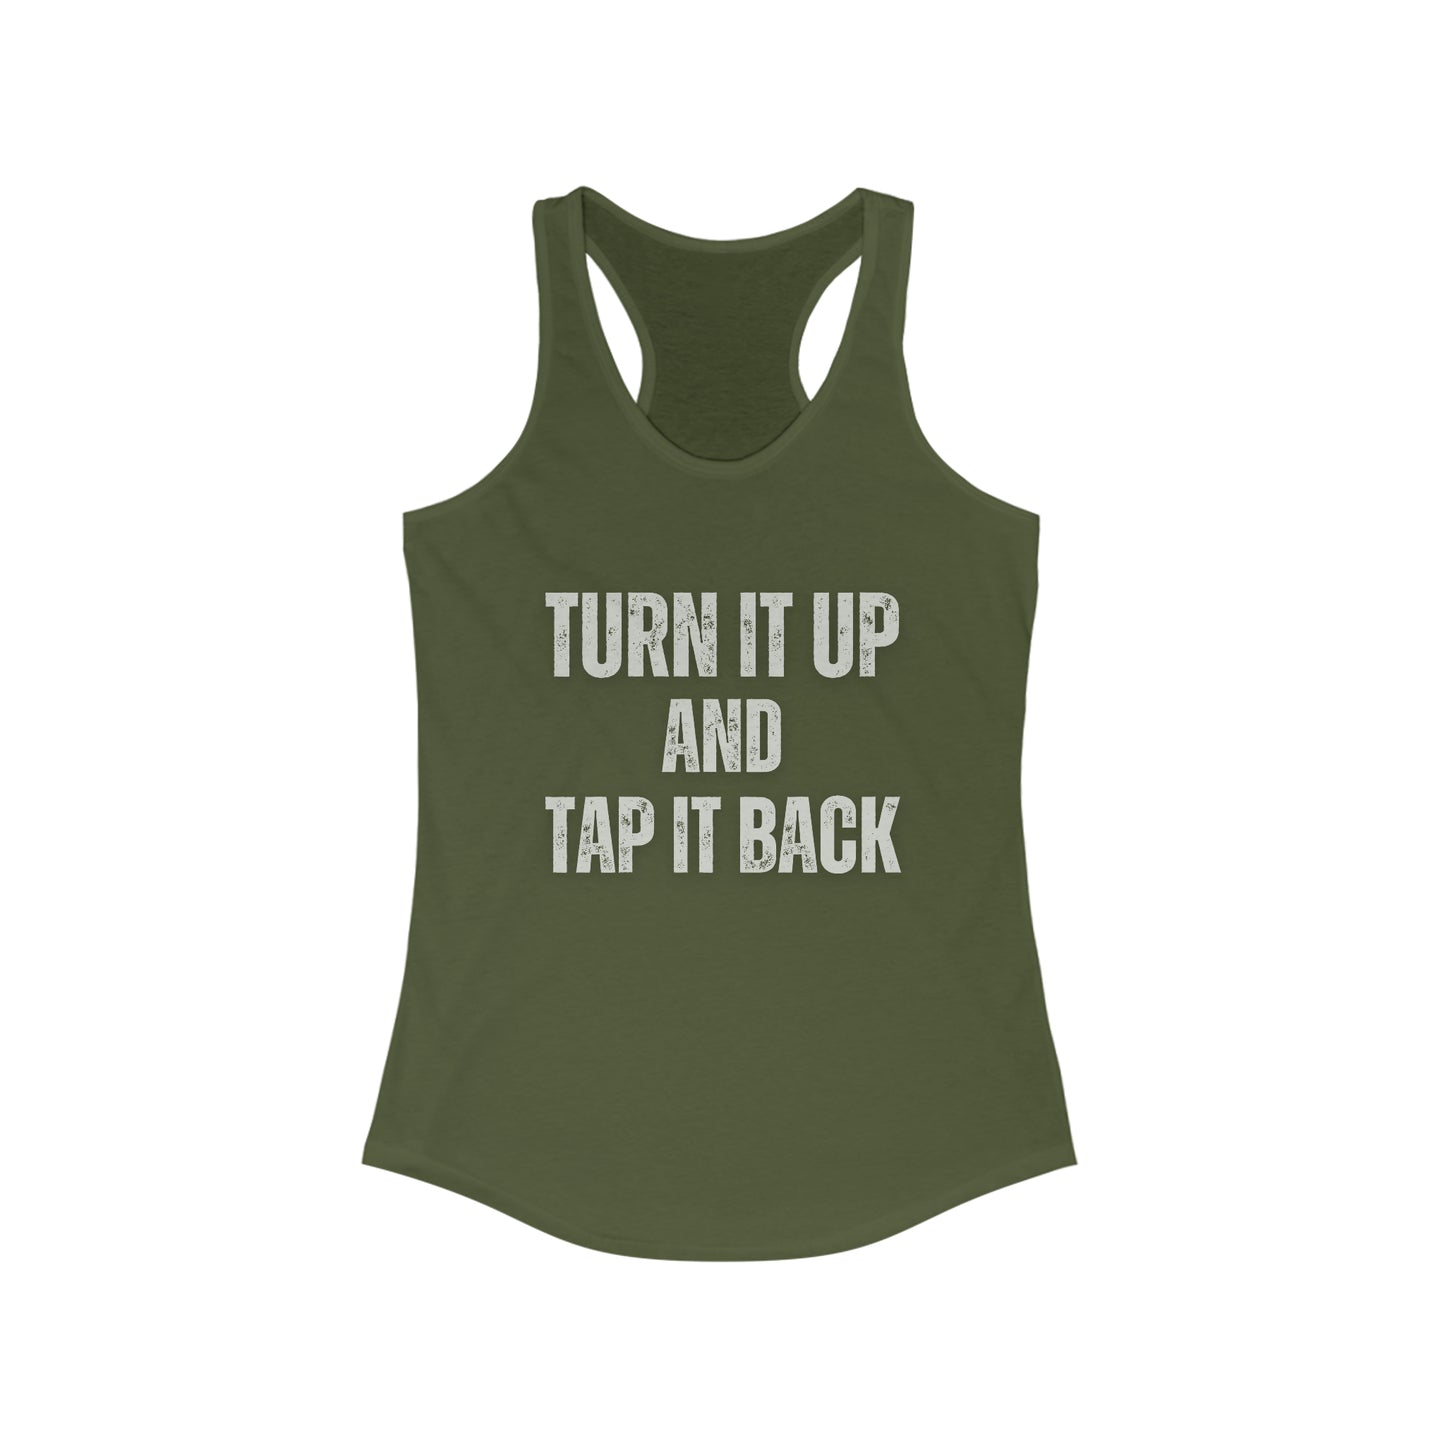 Turn it and tap it back Women's cycling tank top